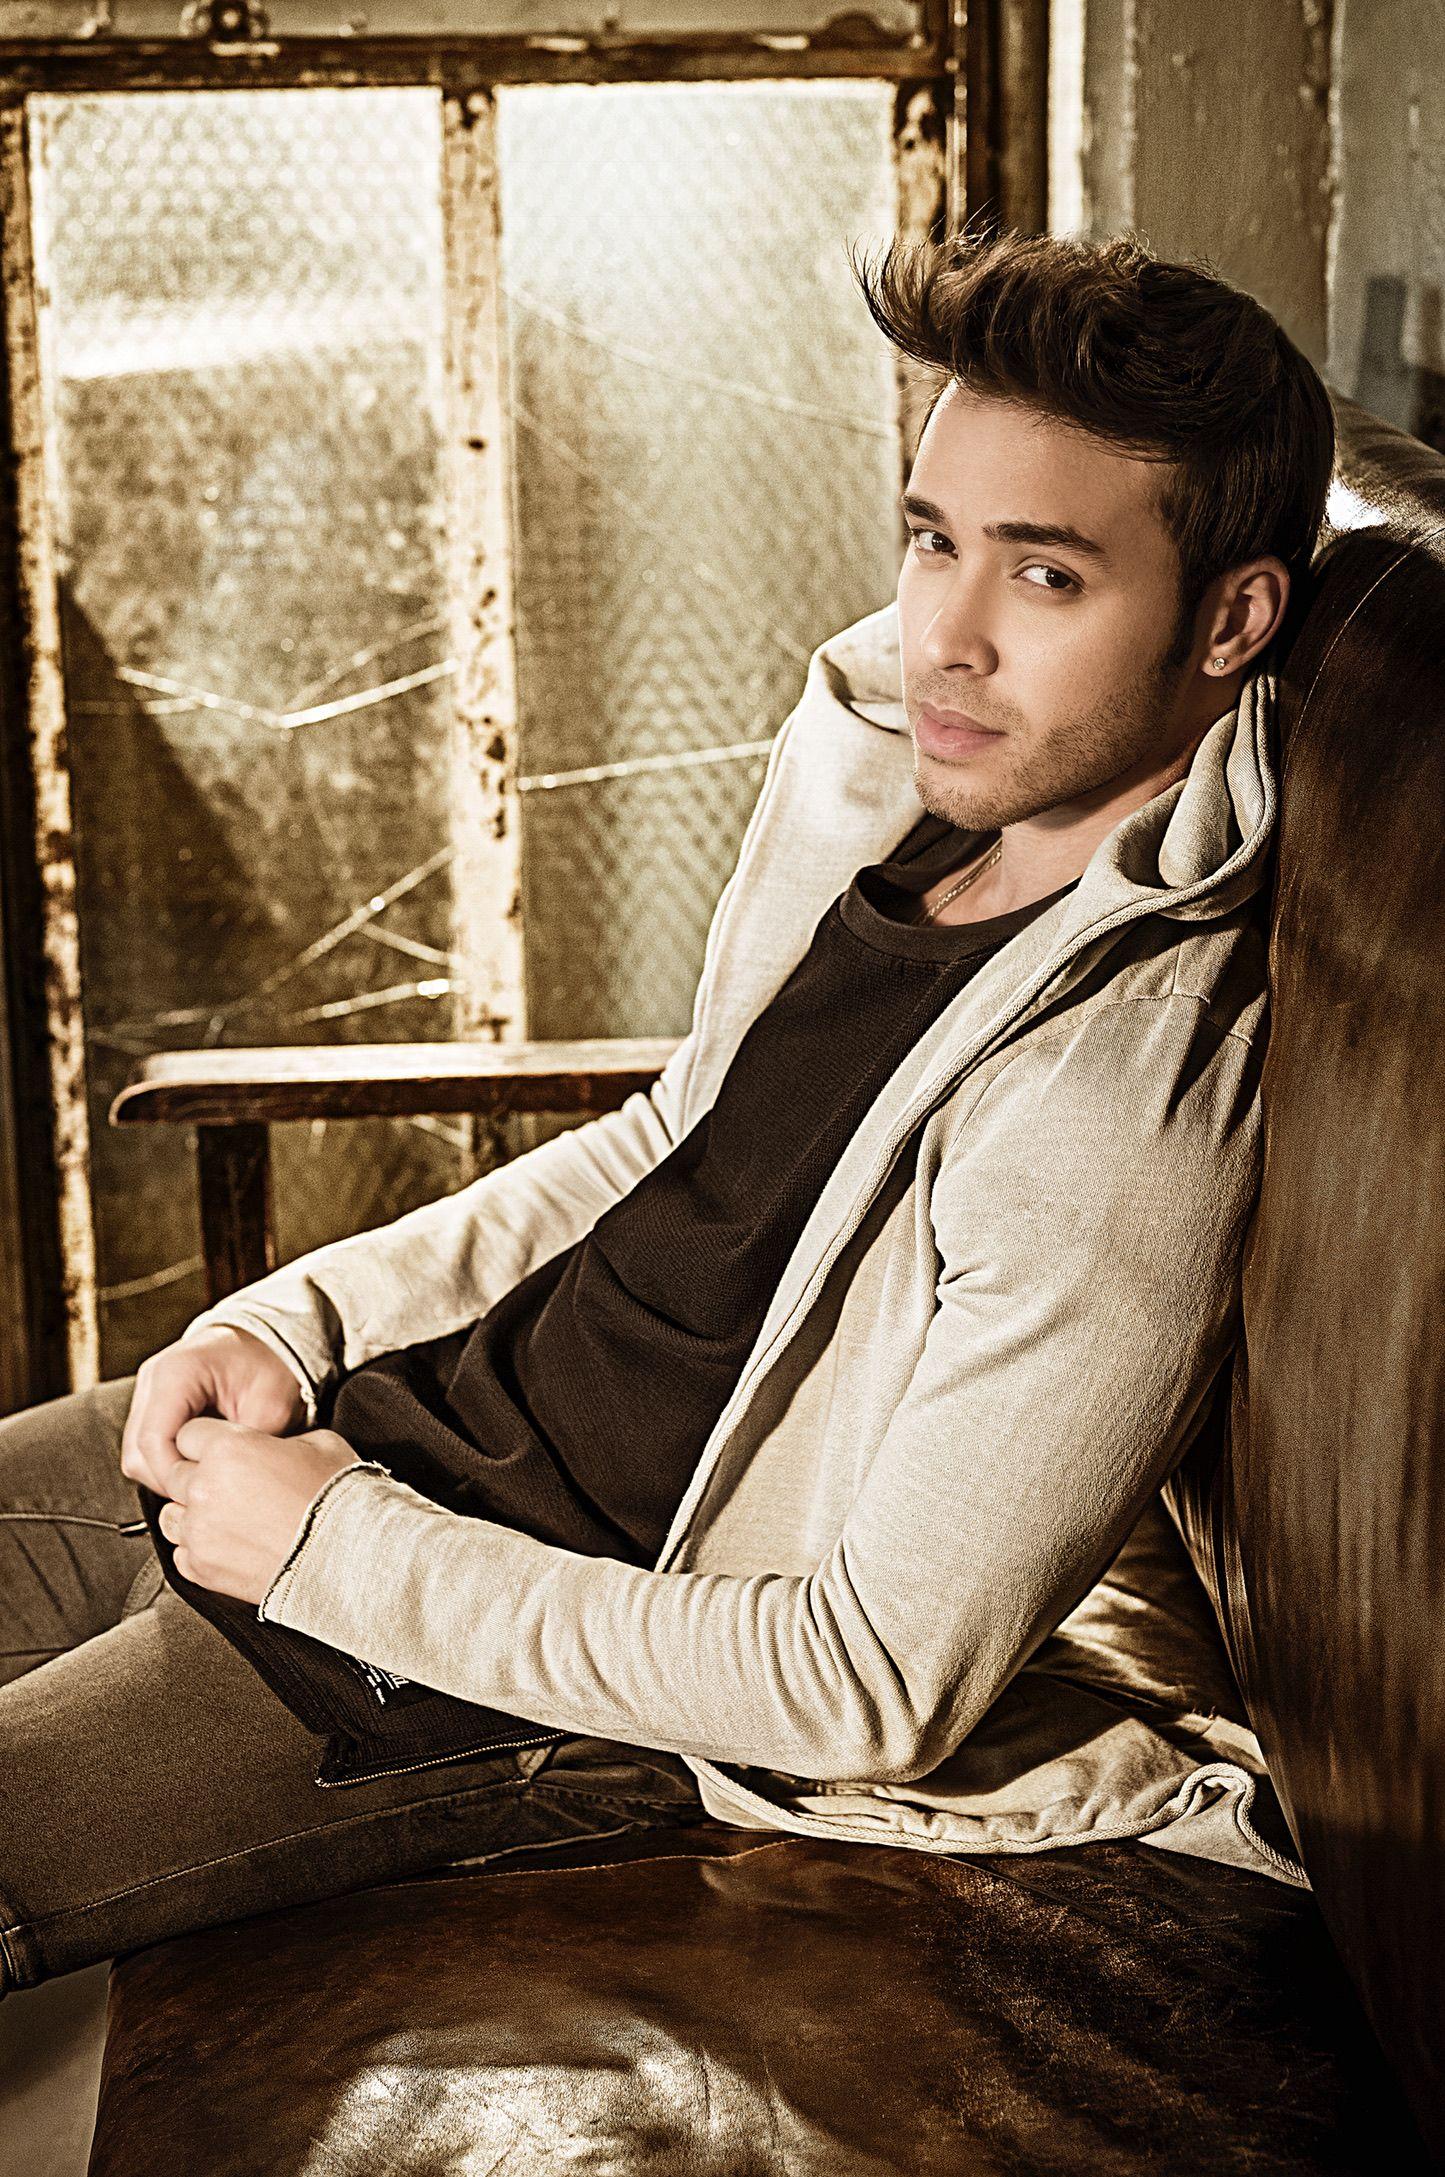 Going Places: Prince Royce hits the road as latest album goes